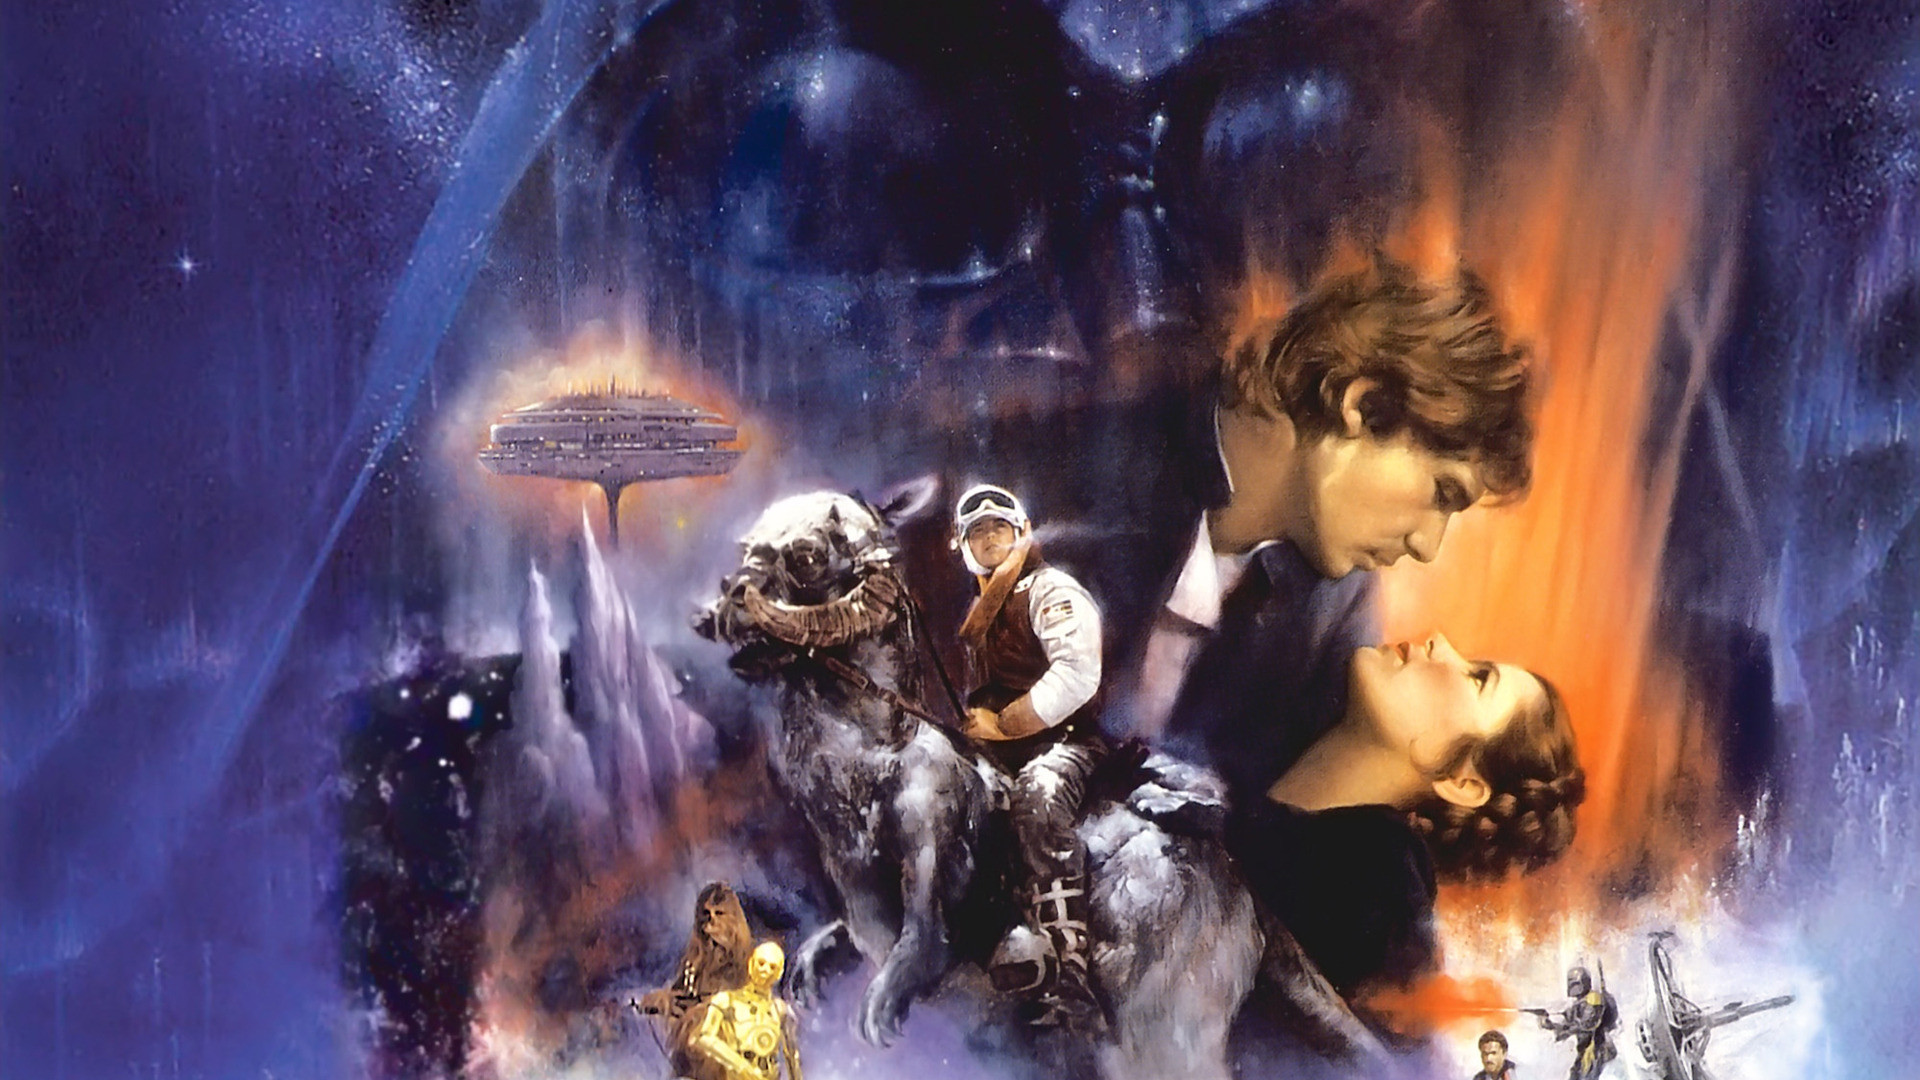  Empire Strikes Back wallpapers and images   wallpapers pictures